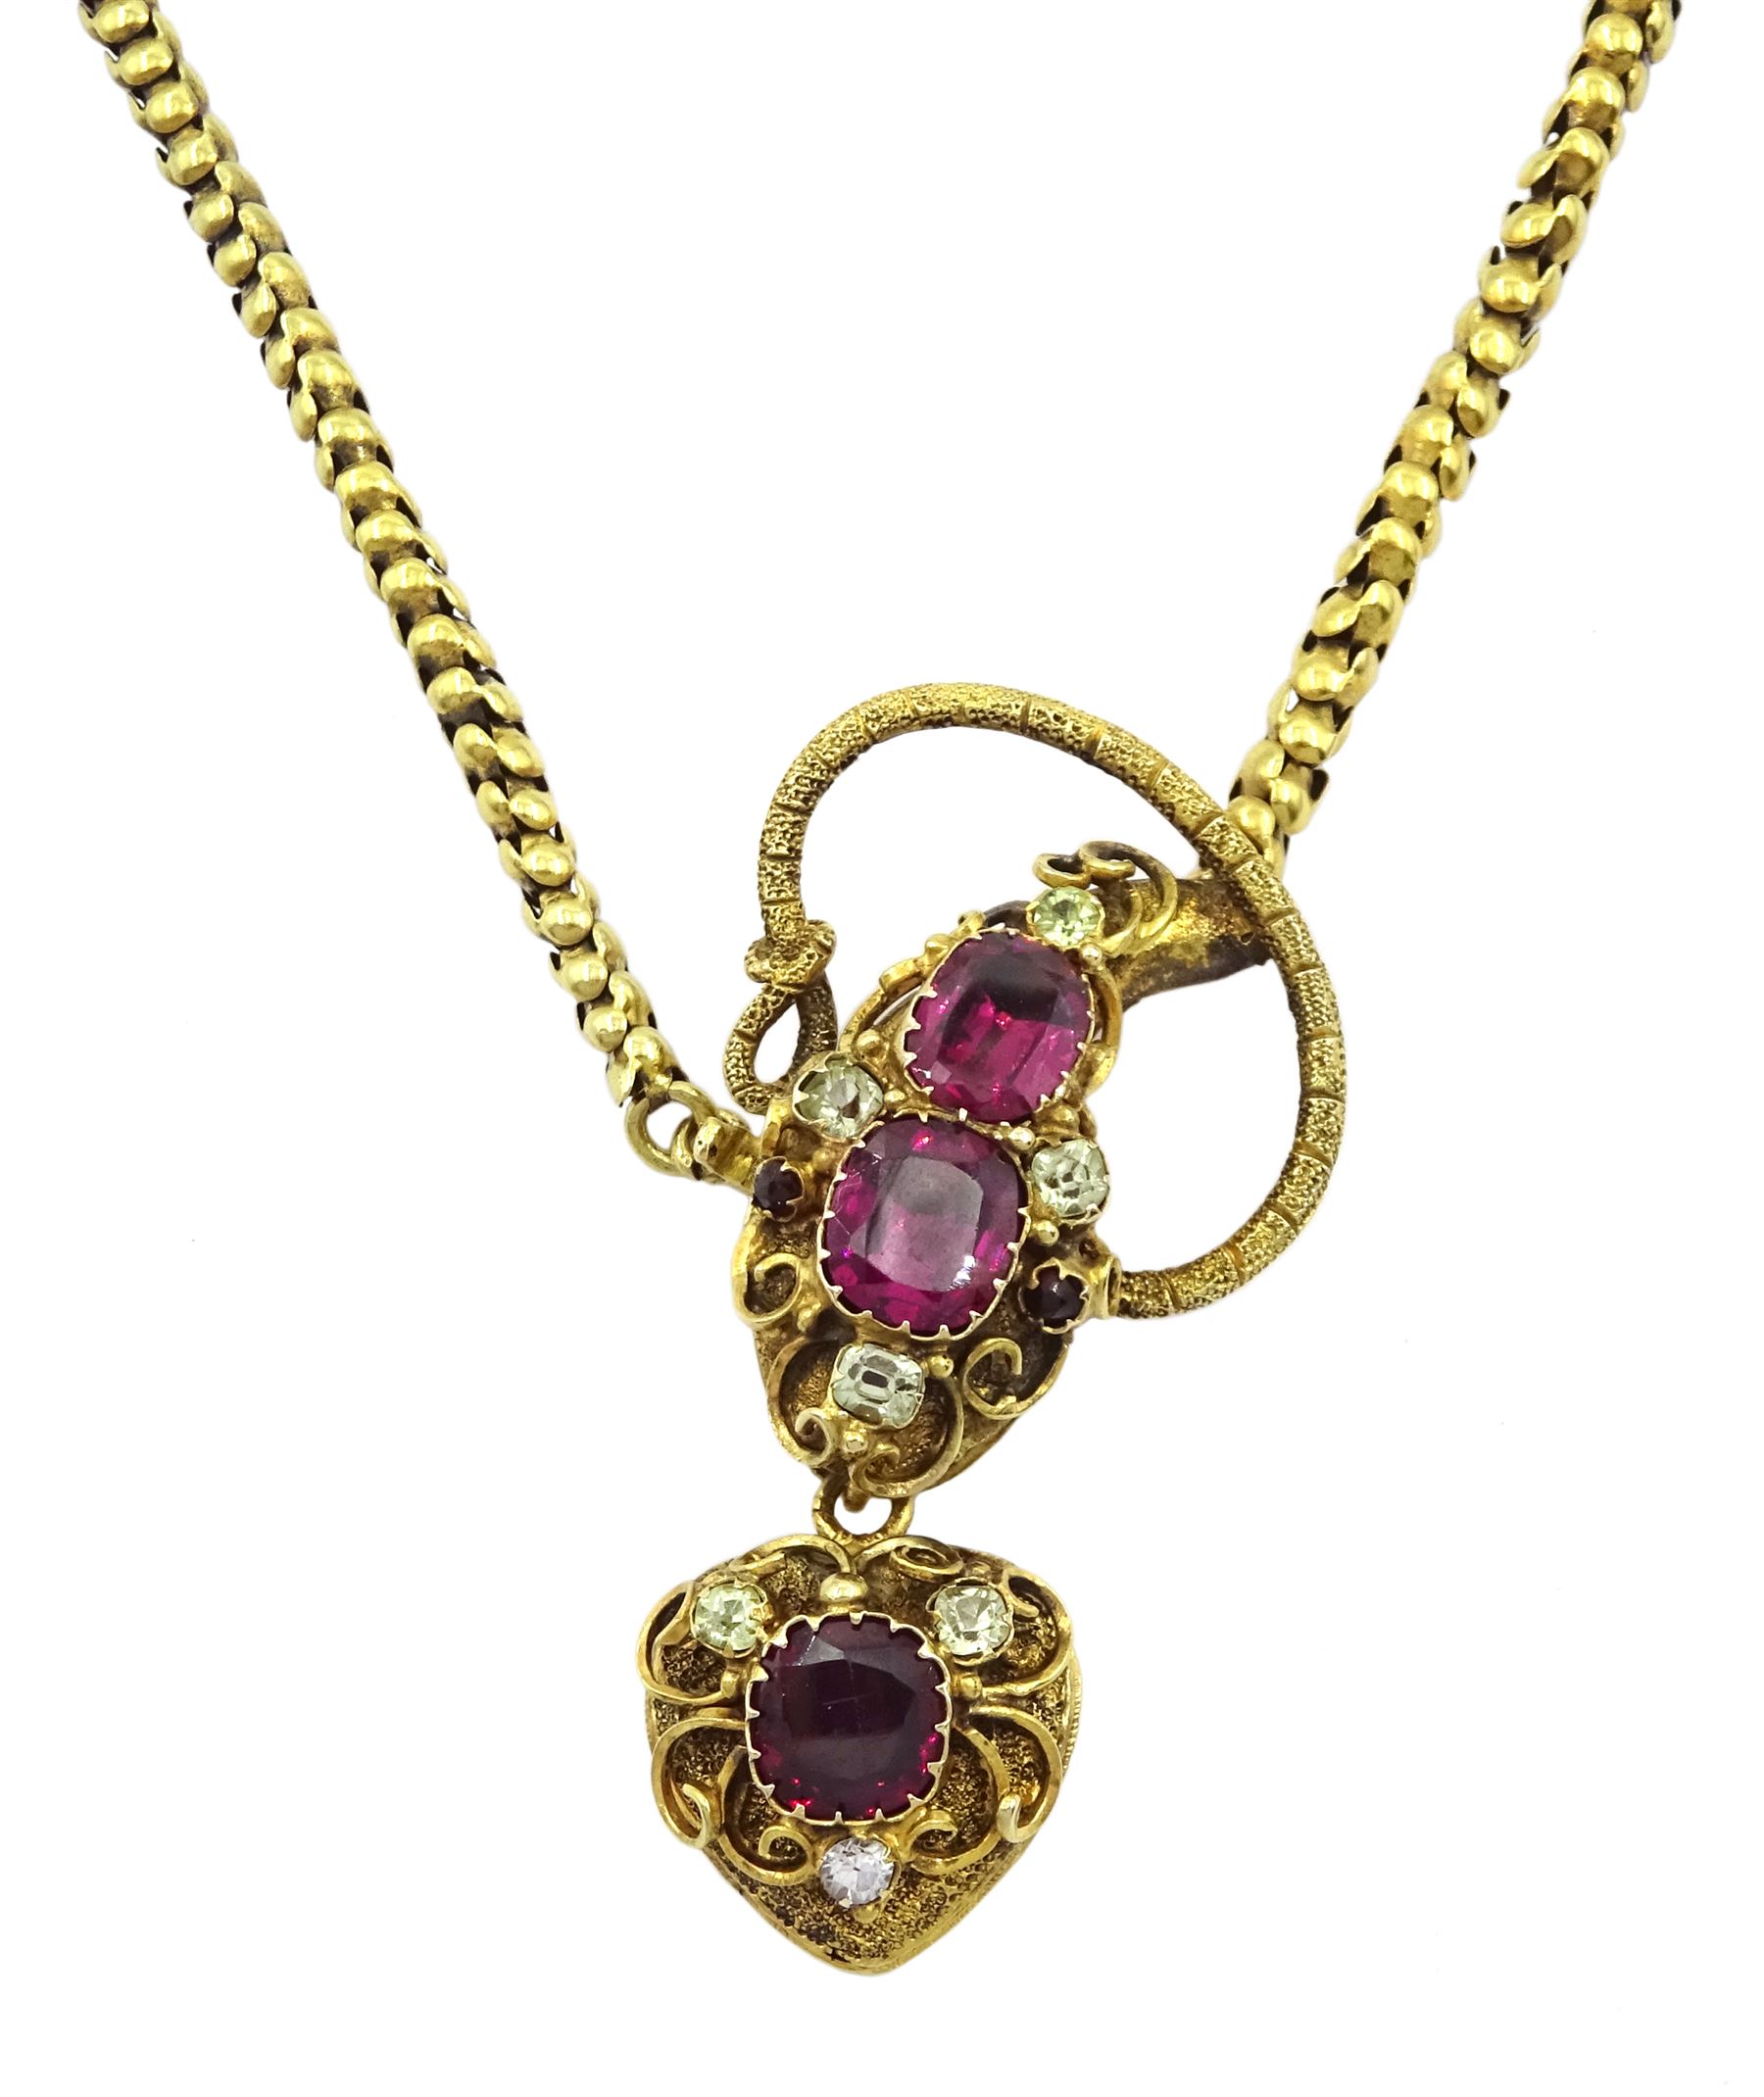 Victorian gold snake necklace - Image 2 of 14